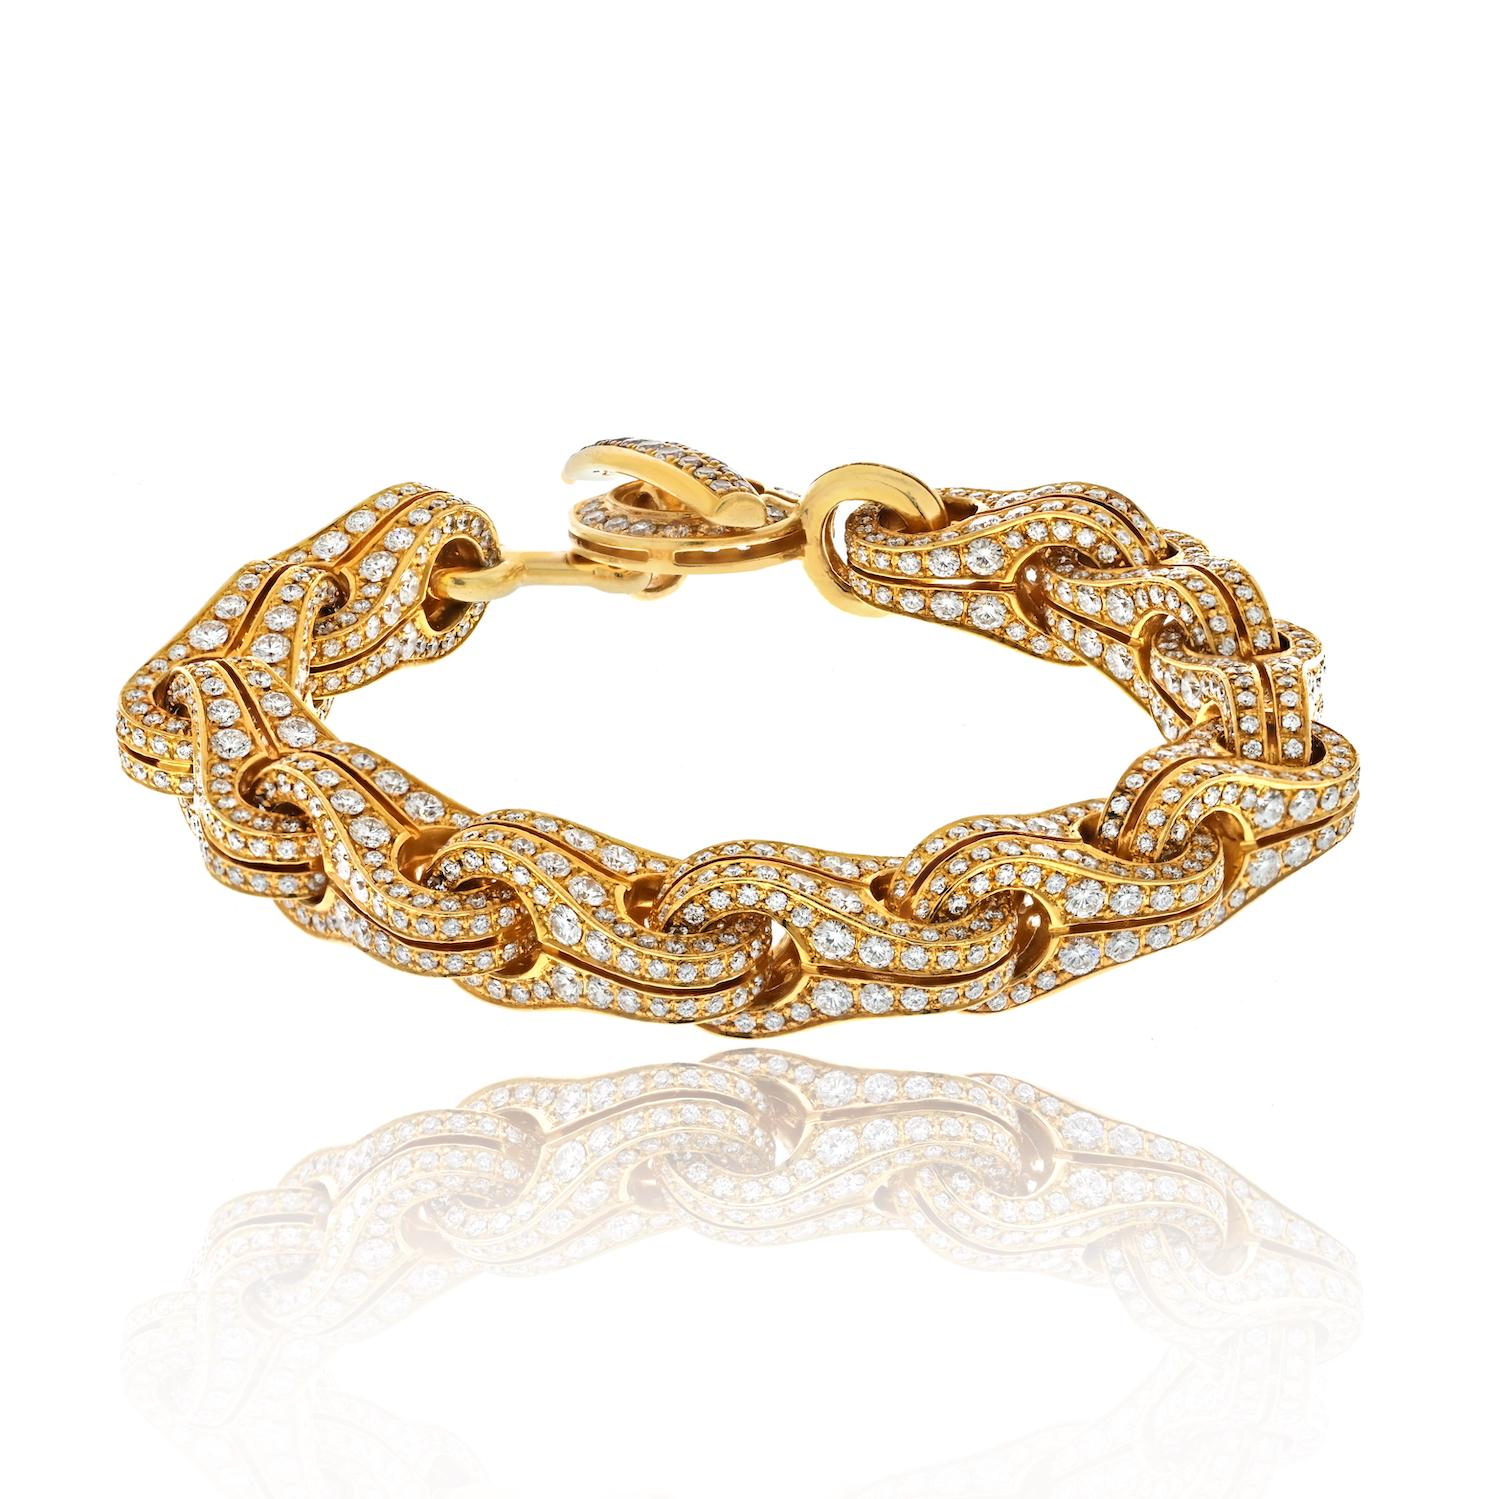 Elevate your wrist with the Di Modolo 18K Yellow Gold 15.52cttw Bicycle Style Link Pave Diamond Bracelet, a stunning blend of innovative design and luxury craftsmanship.

Crafted from 18K yellow gold, this bracelet exudes elegance and is an